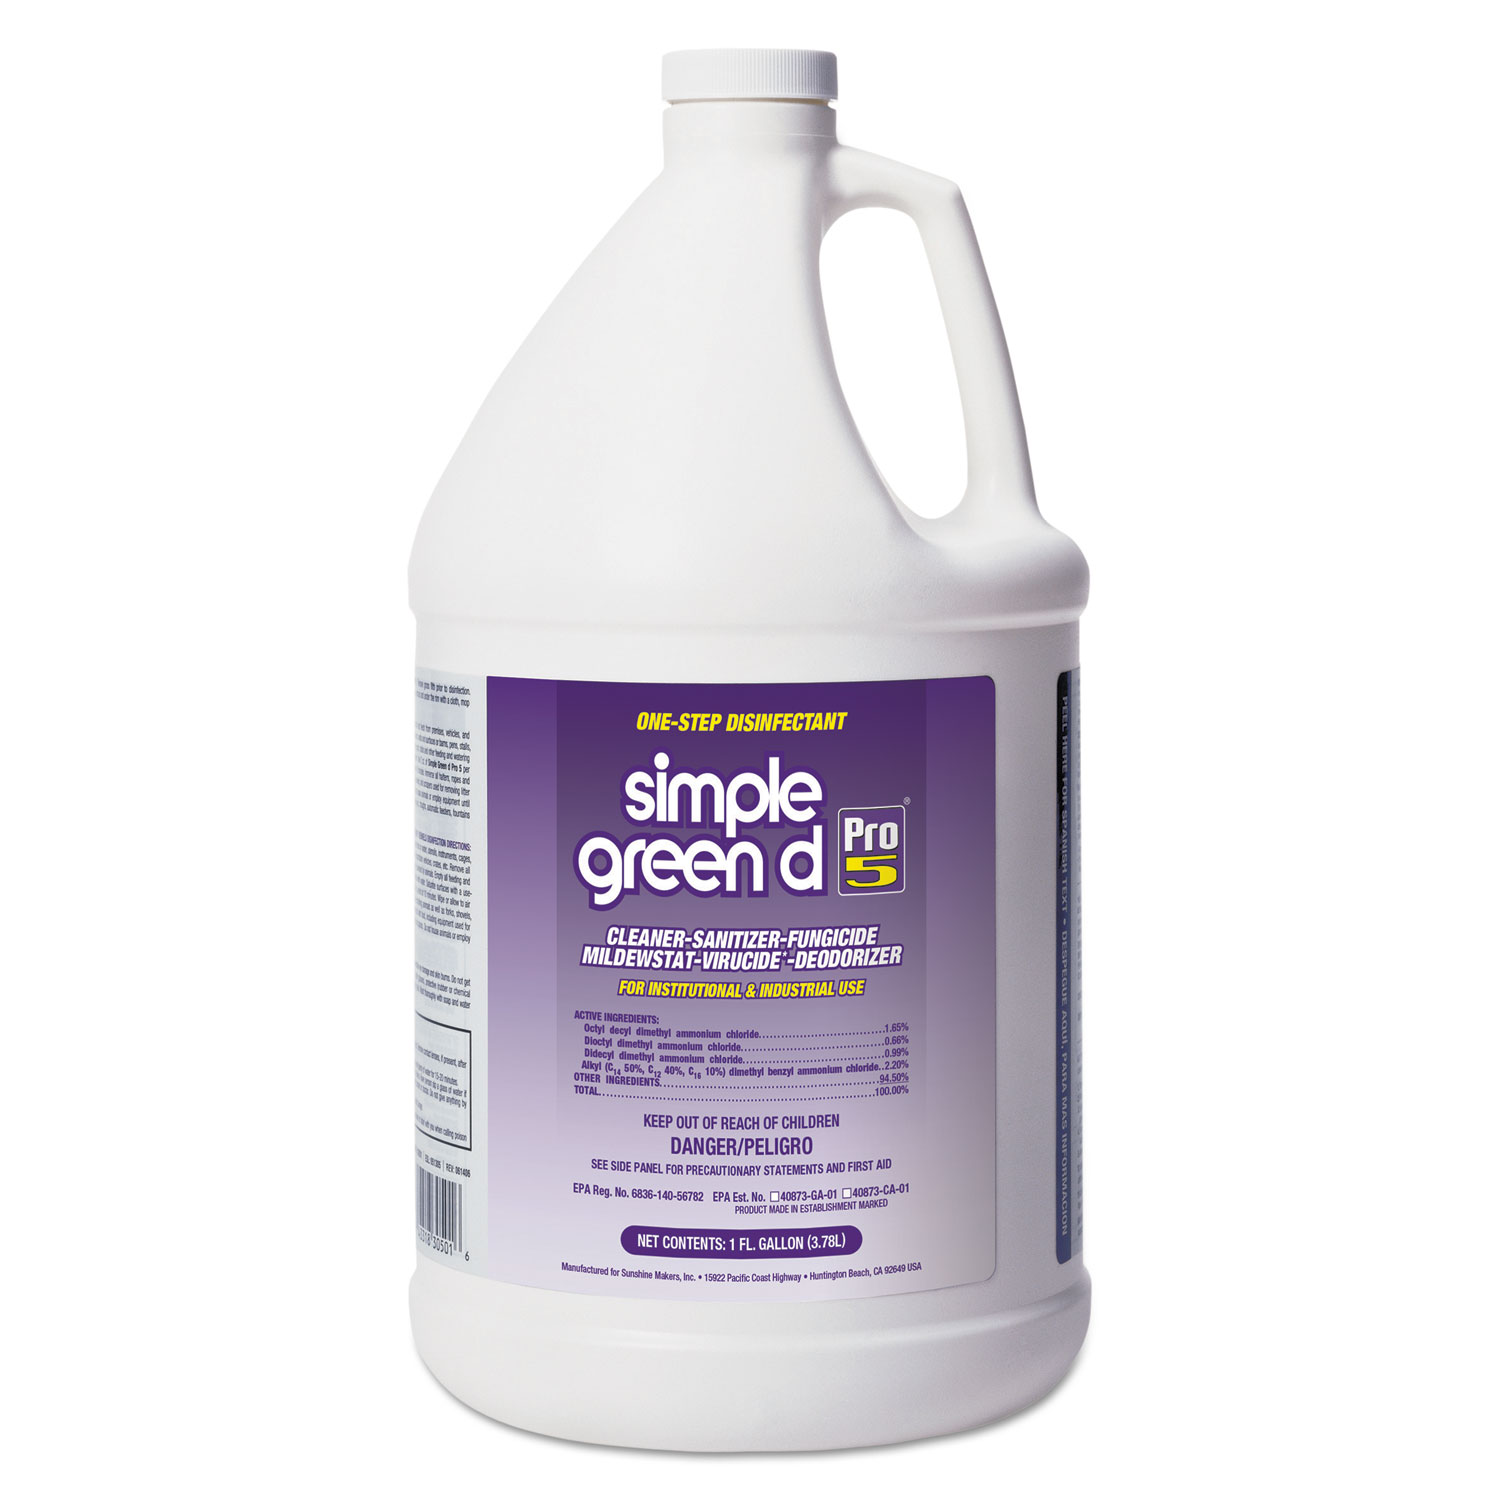  Simple Green 3410000430501 d Pro 5 Disinfectant, 1 gal Bottle (SMP30501CT) 